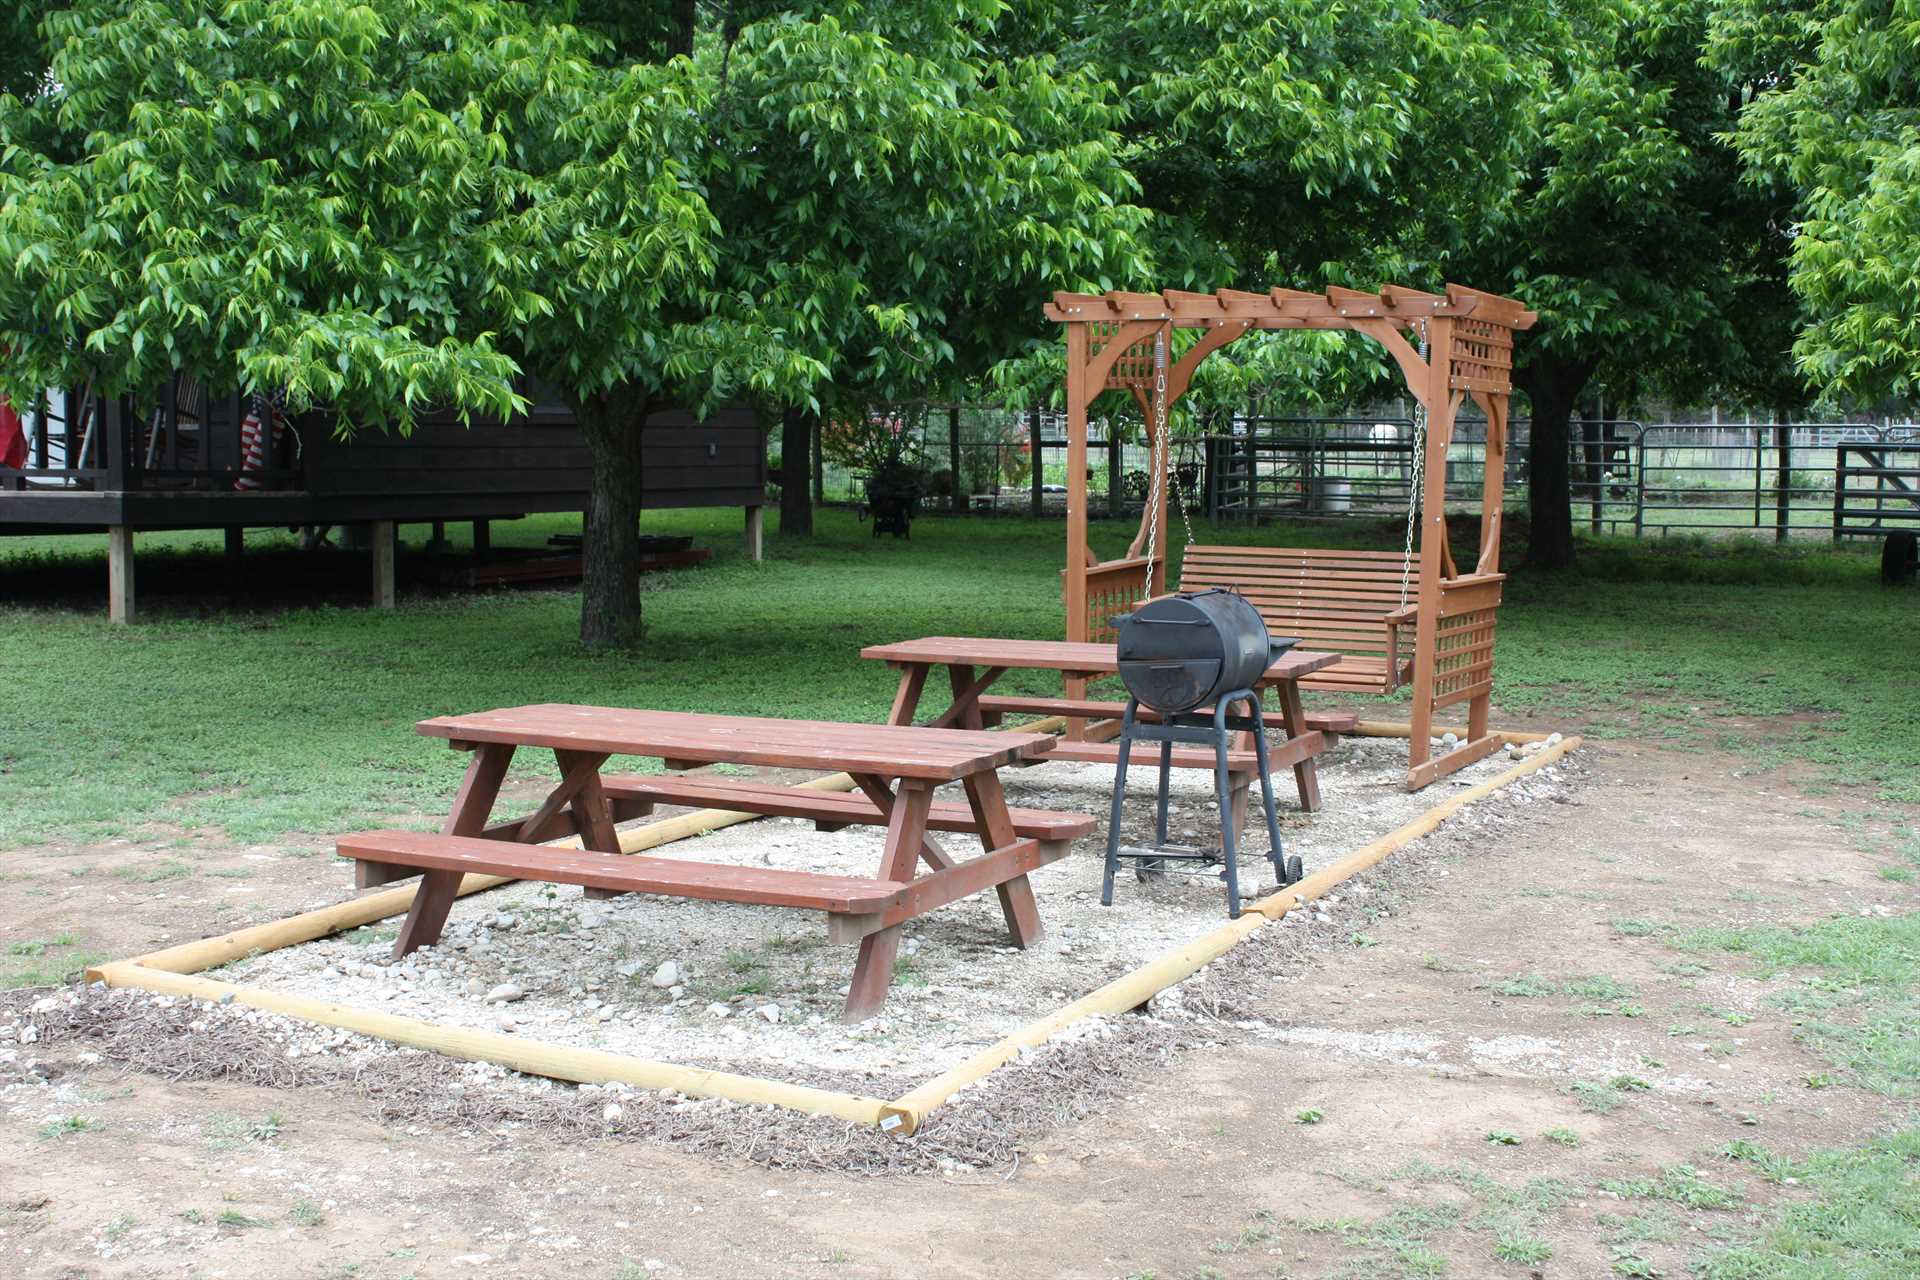                                                 BBQ central! Grill up something special, and enjoy your feast under the pecan trees.